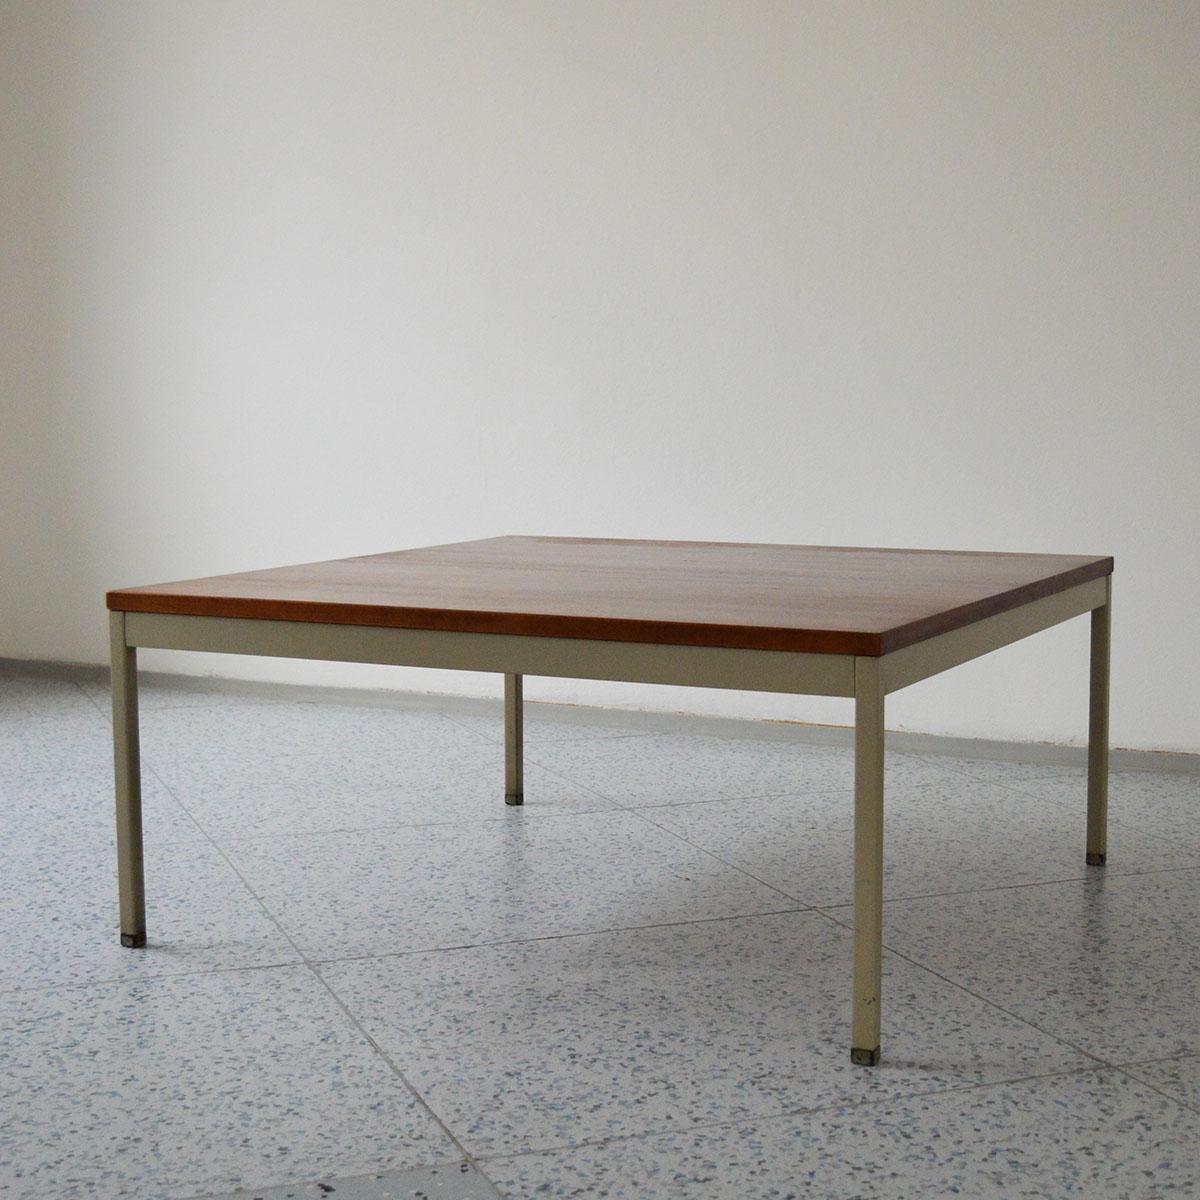 Swedish teak and metal center square coffee table, designed by Erik Herløw and manufactured by Nordiska Kompaniet (NK) in Sweden, 1960s.

This table comes from Nordiska Kompaniet’s Triva Modul series, which was produced by the company in the